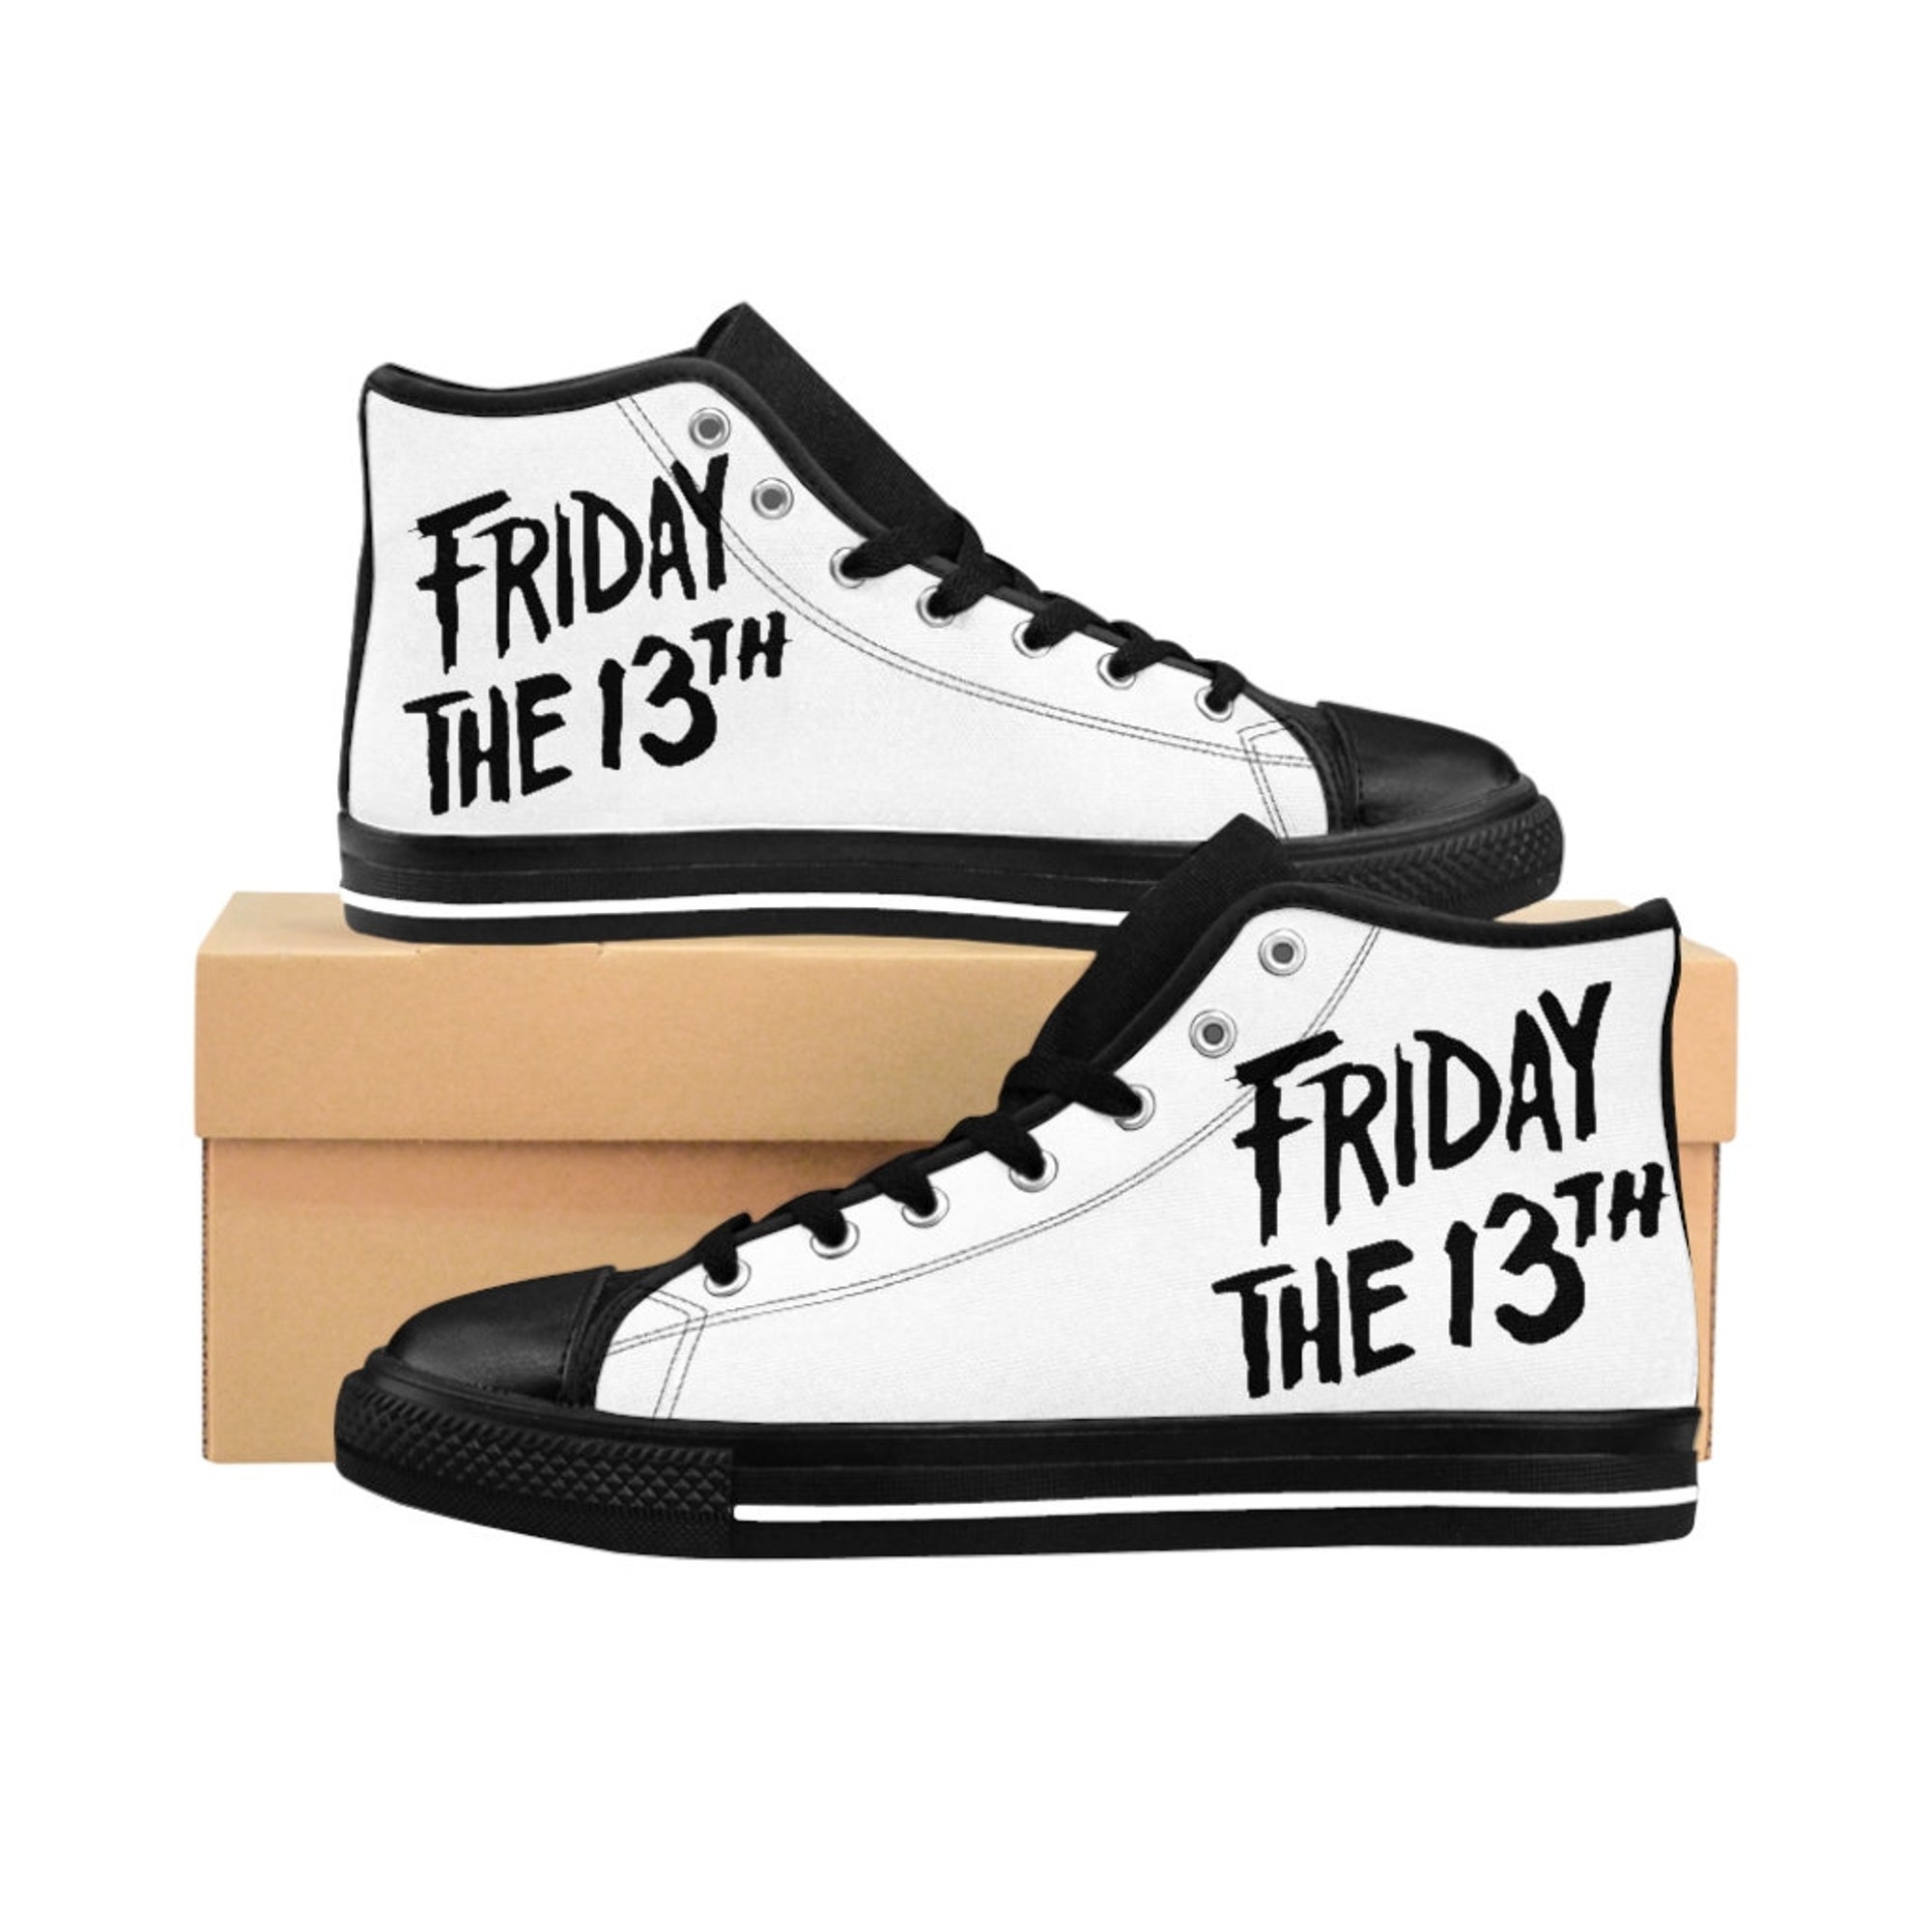 Black Friday, Men's High-top Sneakers, Black Friday Sale Father's Day Gift